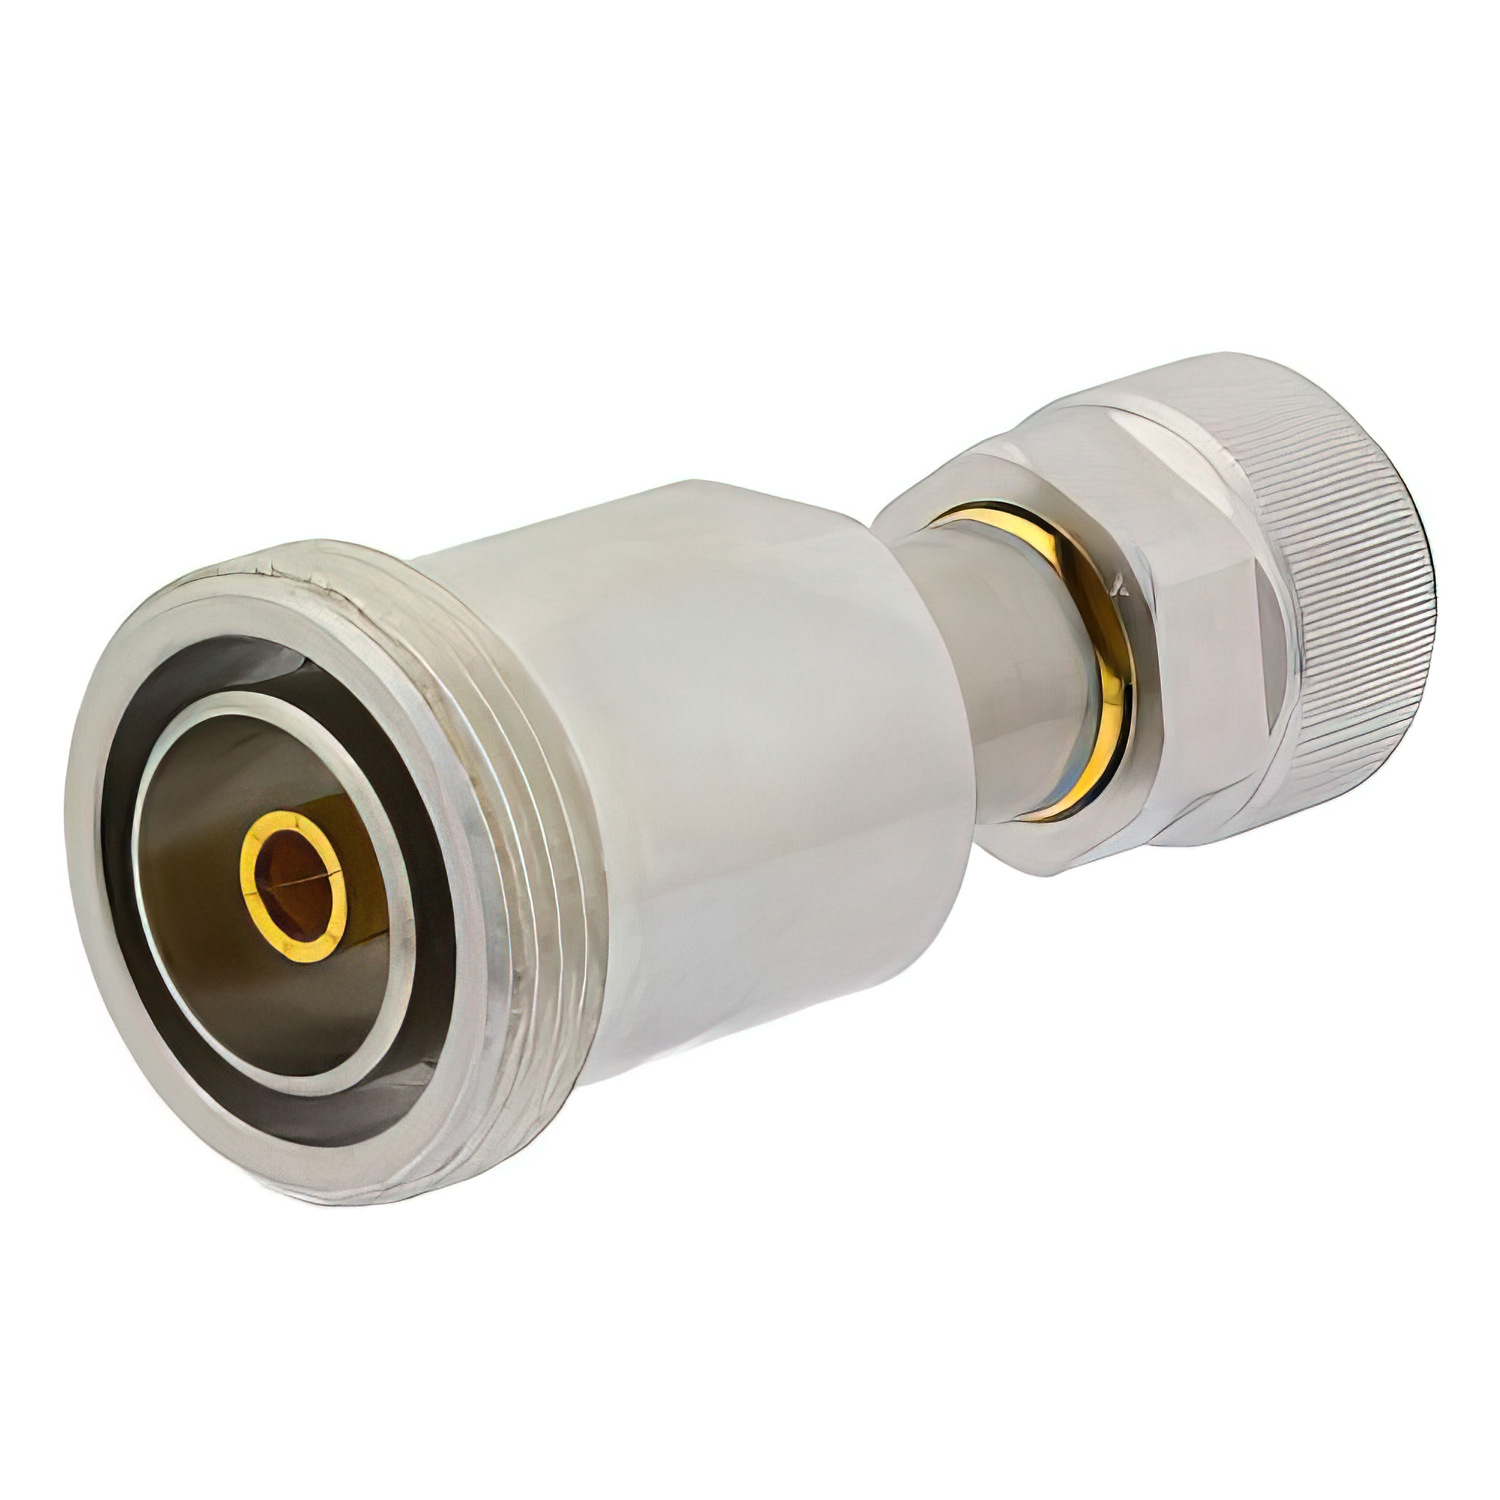 Precision 7-16 DIN Female to 7mm  Adapter1